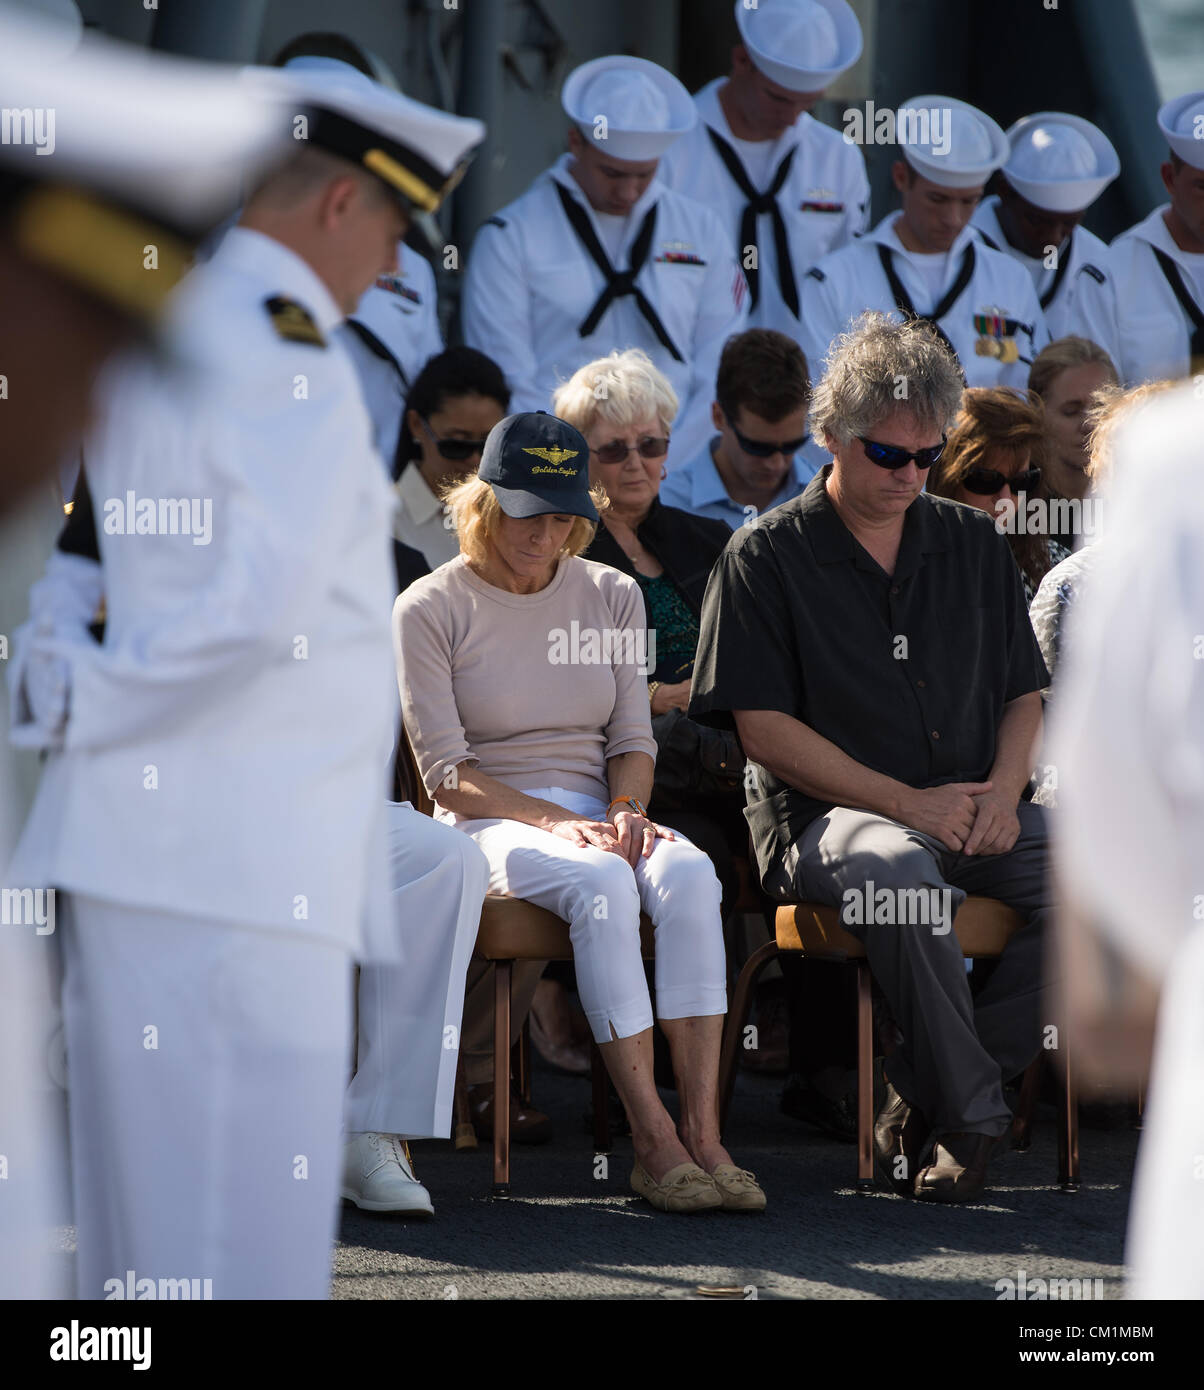 Carol Armstrong, wife of Neil Armstrong, Eric Rick Armstrong, son of Neil Armstrong, and other family members are seen bowing their heads during the burial at sea service for her husband Apollo 11 astronaut Neil Armstrong September 14, 2012 aboard the USS Philippine Sea in the Atlantic Ocean. Armstrong, the first man to walk on the moon during the 1969 Apollo 11 mission, died August 25. He was 82. Stock Photo